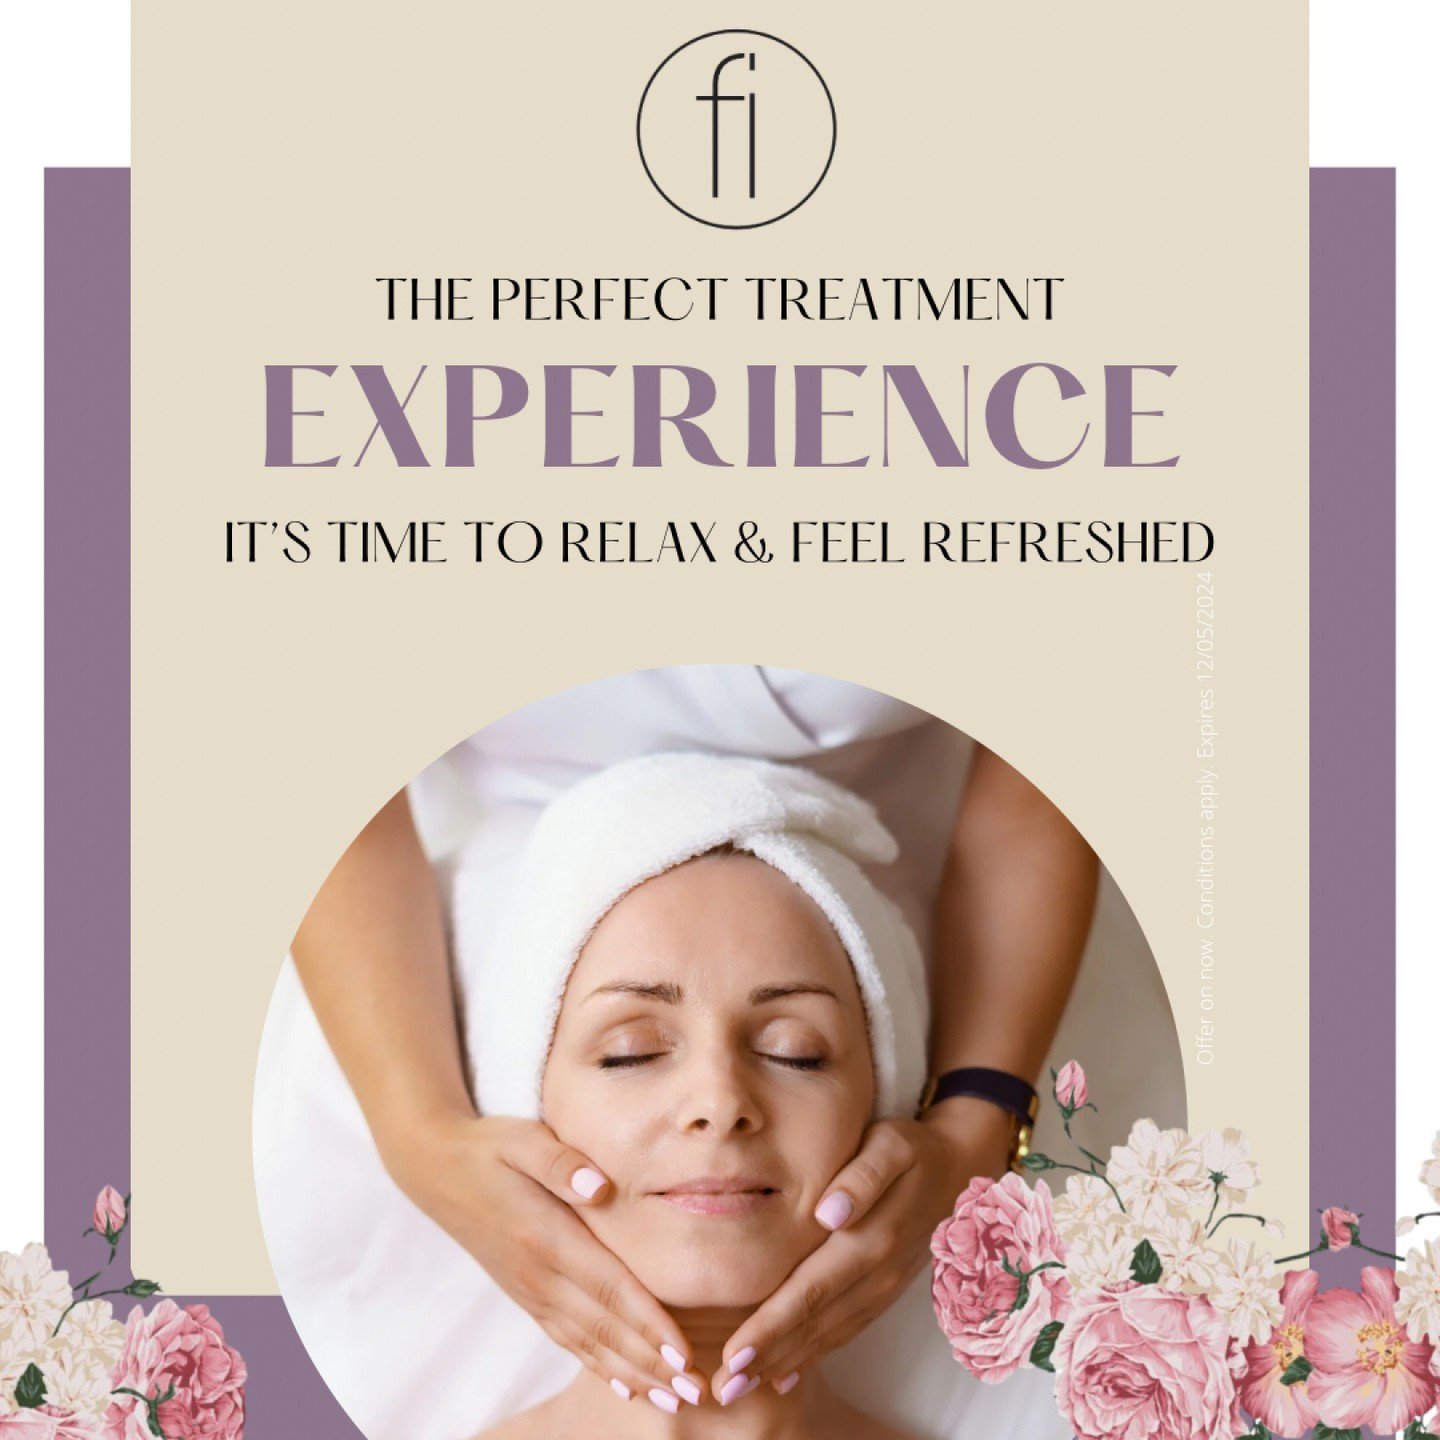 This is the perfect time to show your appreciation for everything your mum has done for you. Let's make her feel extra special by giving her the gift of relaxation and pampering. 

At Facial Impressions, we have the ULTIMATE PAMPER PACKAGE for your m